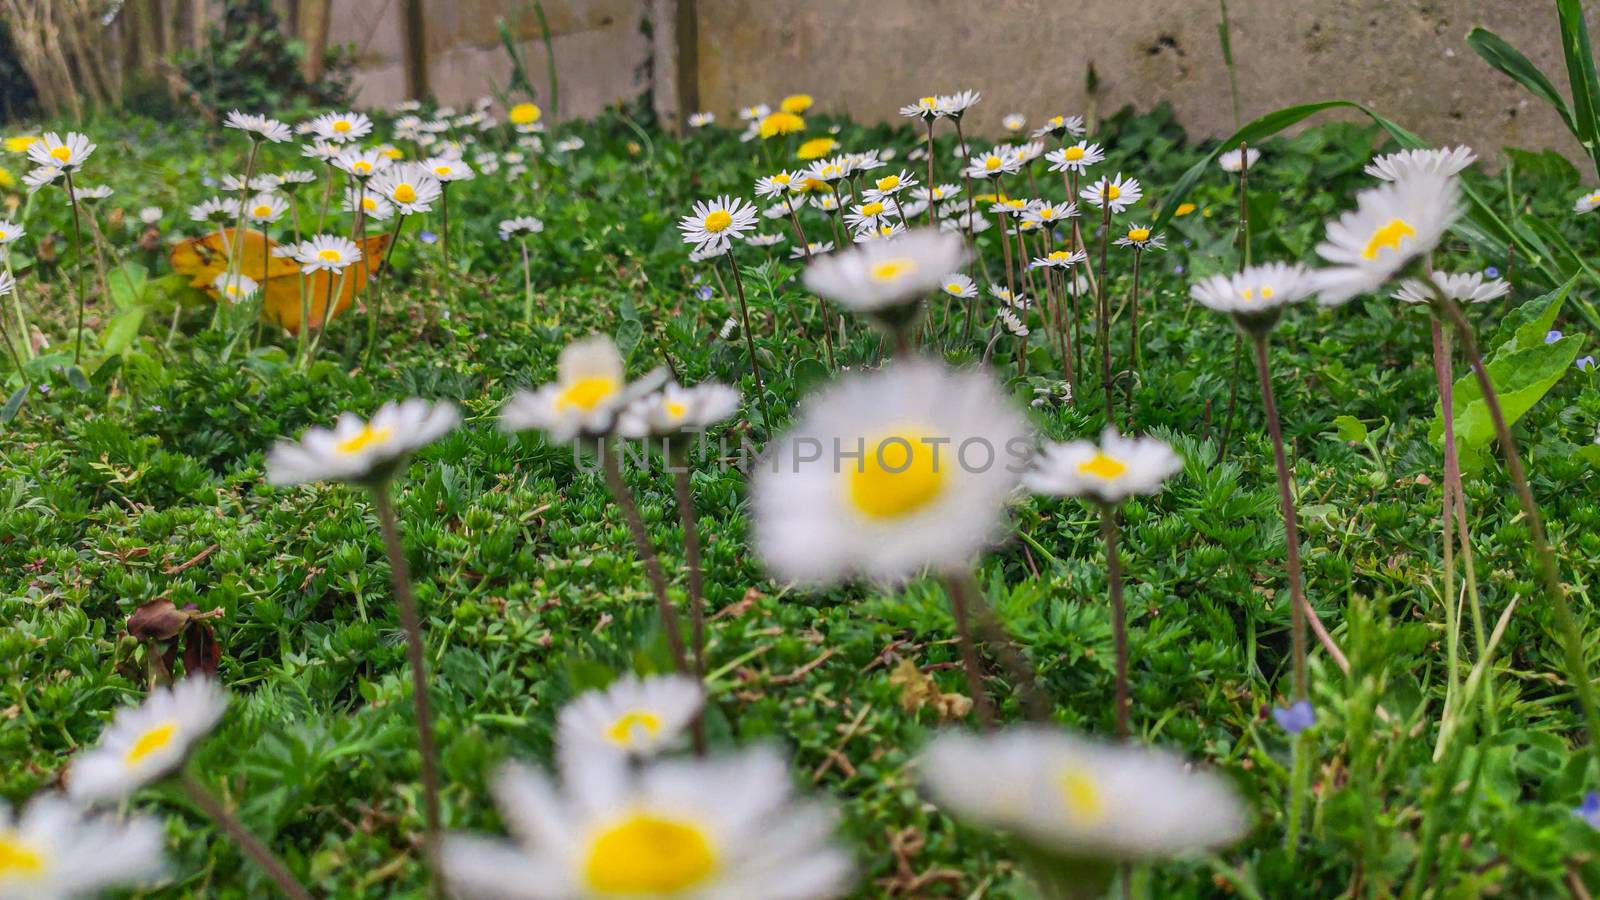 Daisies on the lawn by pippocarlot